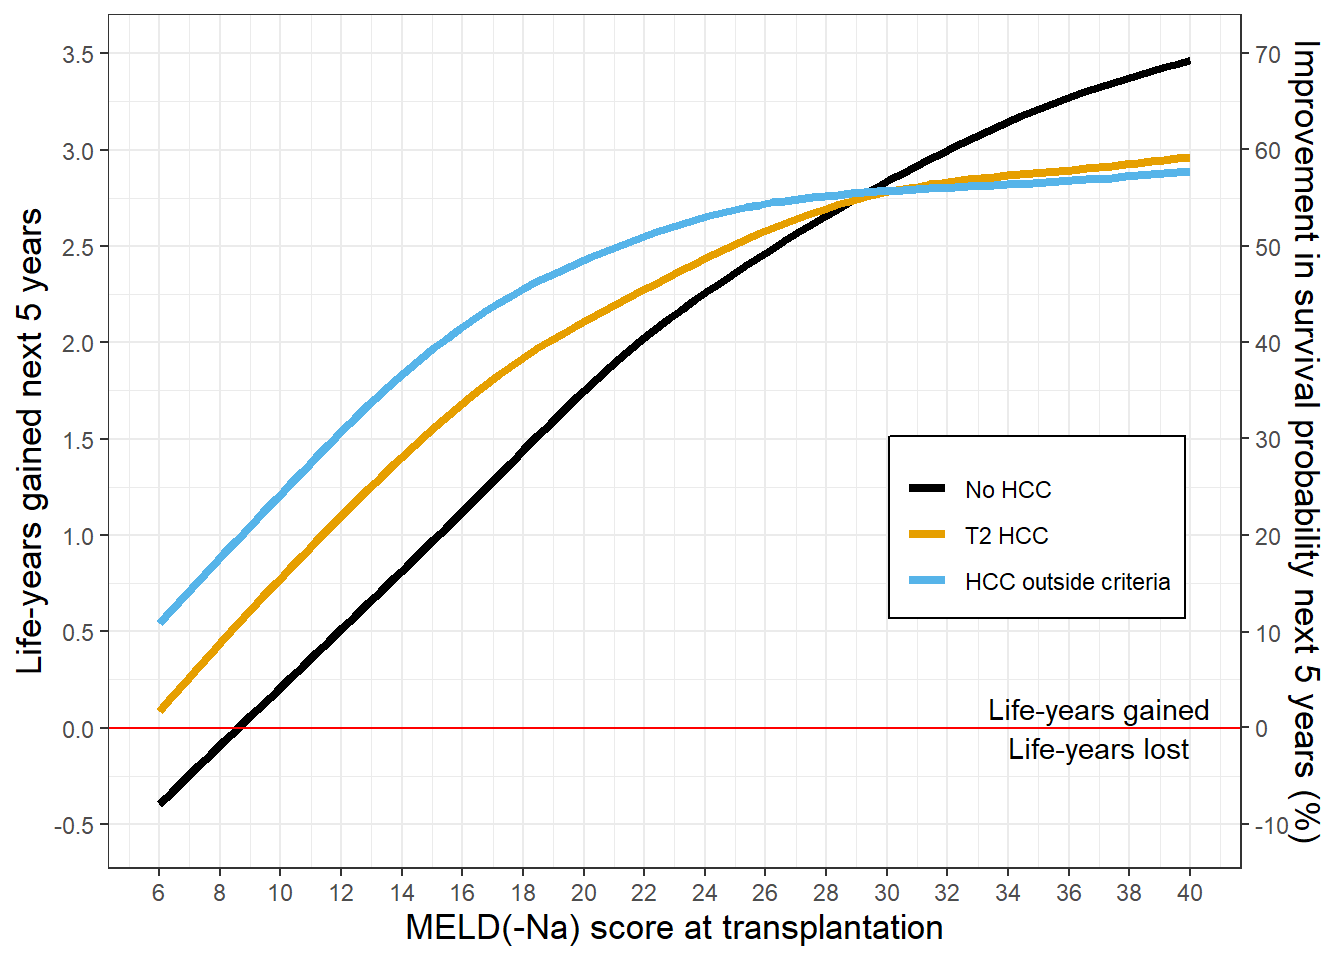 The mean survival and benefit for the next five years per MELD(-Na) score. Note the changing y-axes.